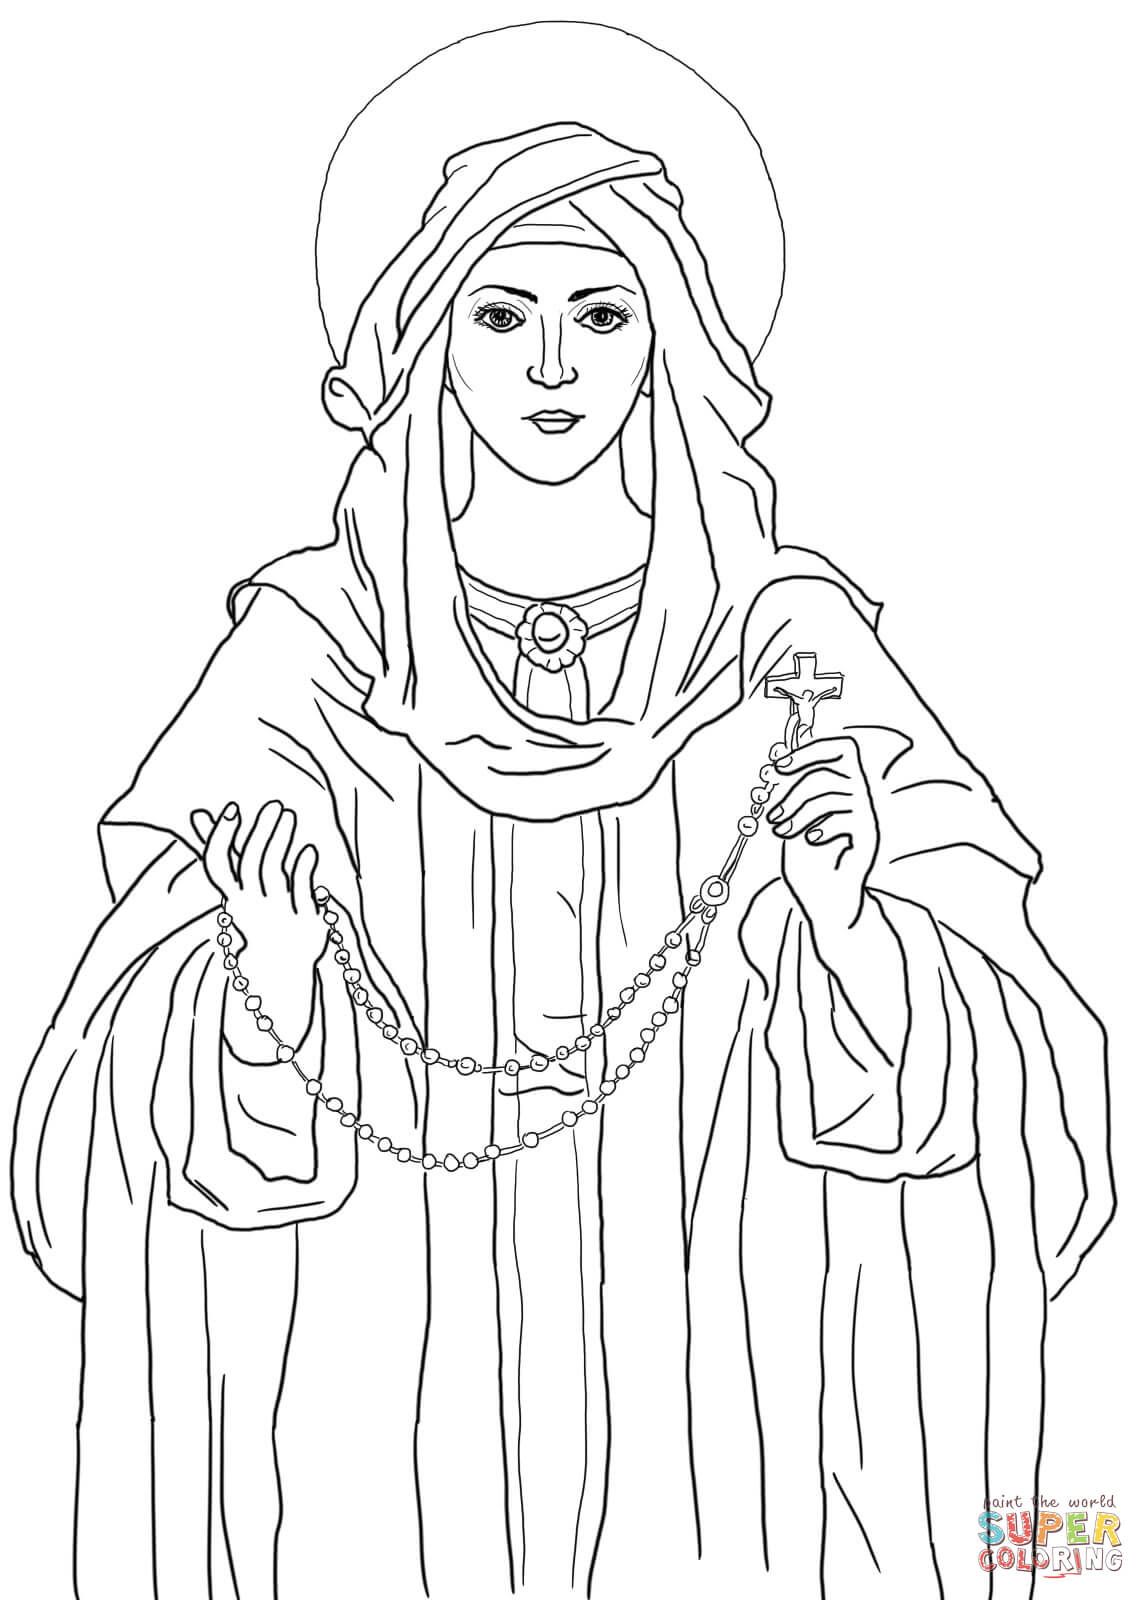 Our lady of the rosary coloring page free printable coloring pages catholic coloring catholic coloring sheets saint coloring